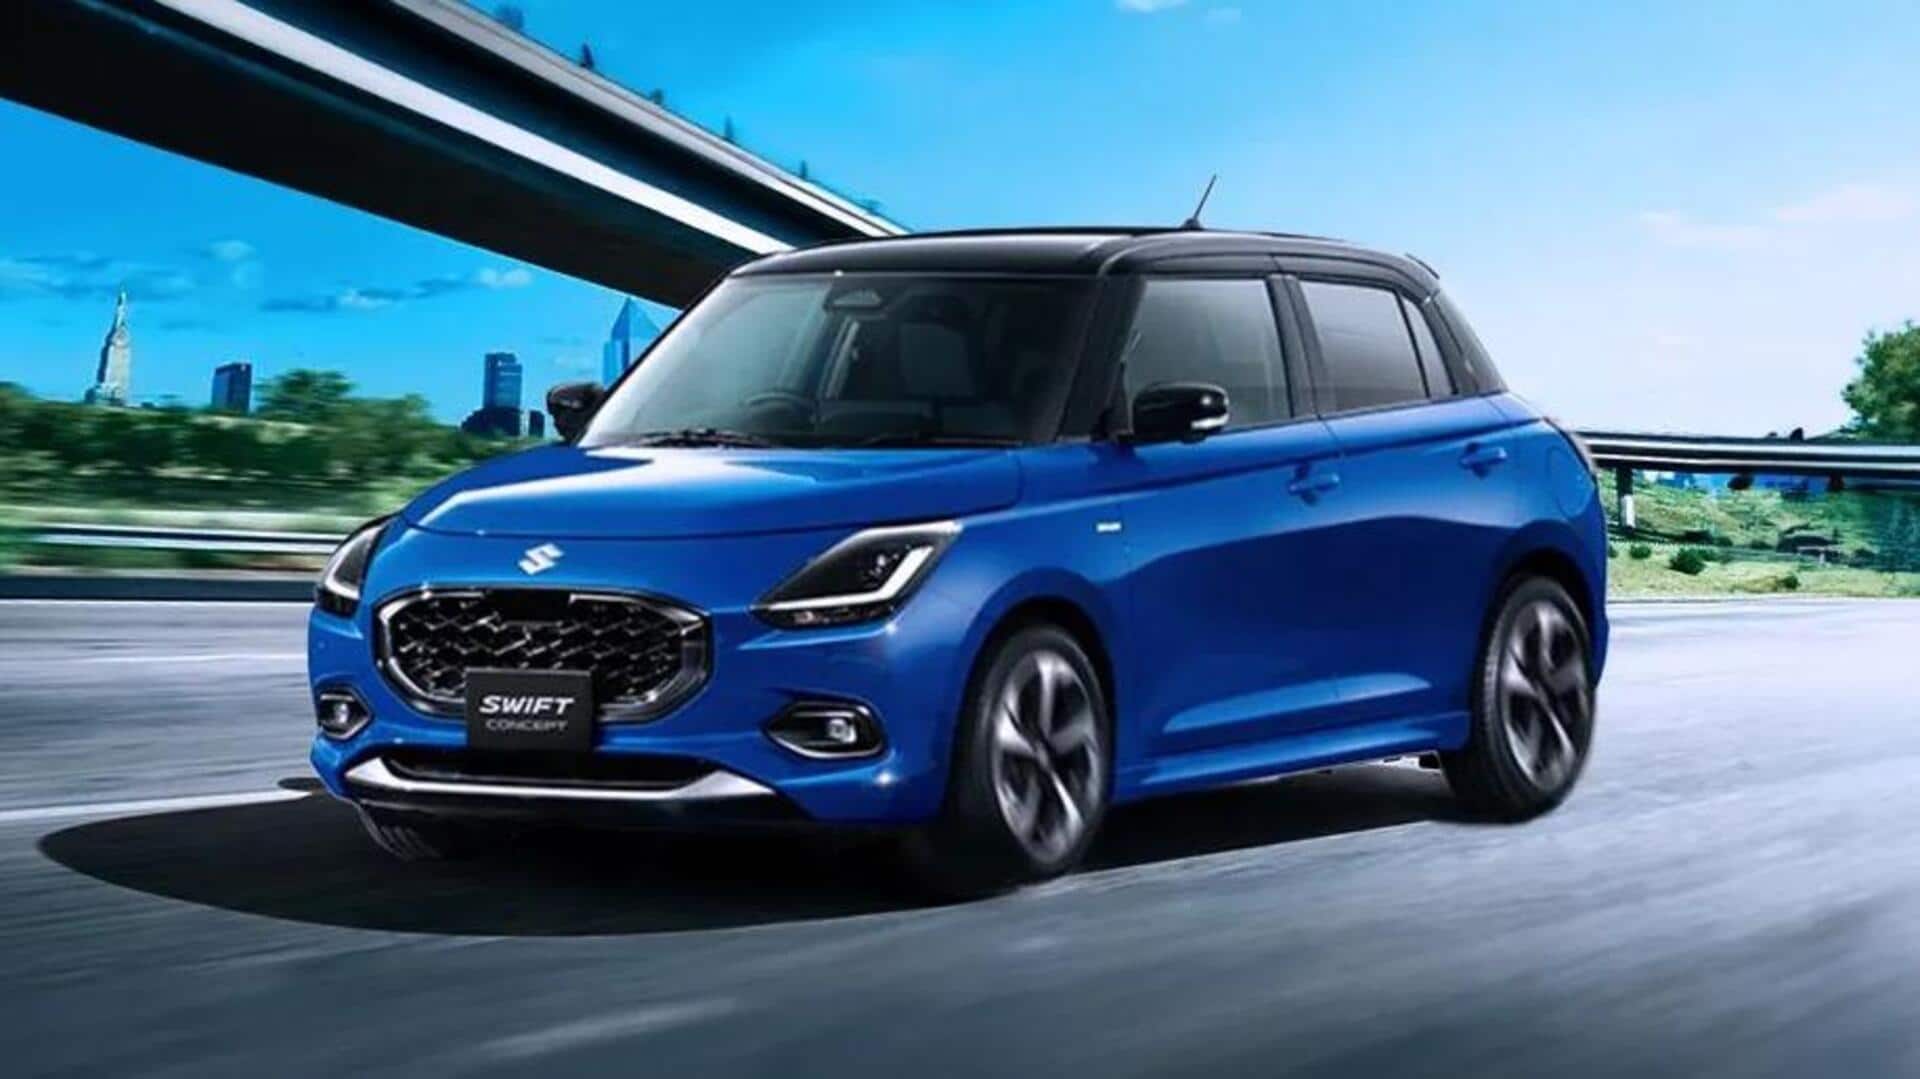 Indiabound Maruti Suzuki Swift breaks cover at Japan Mobility Show